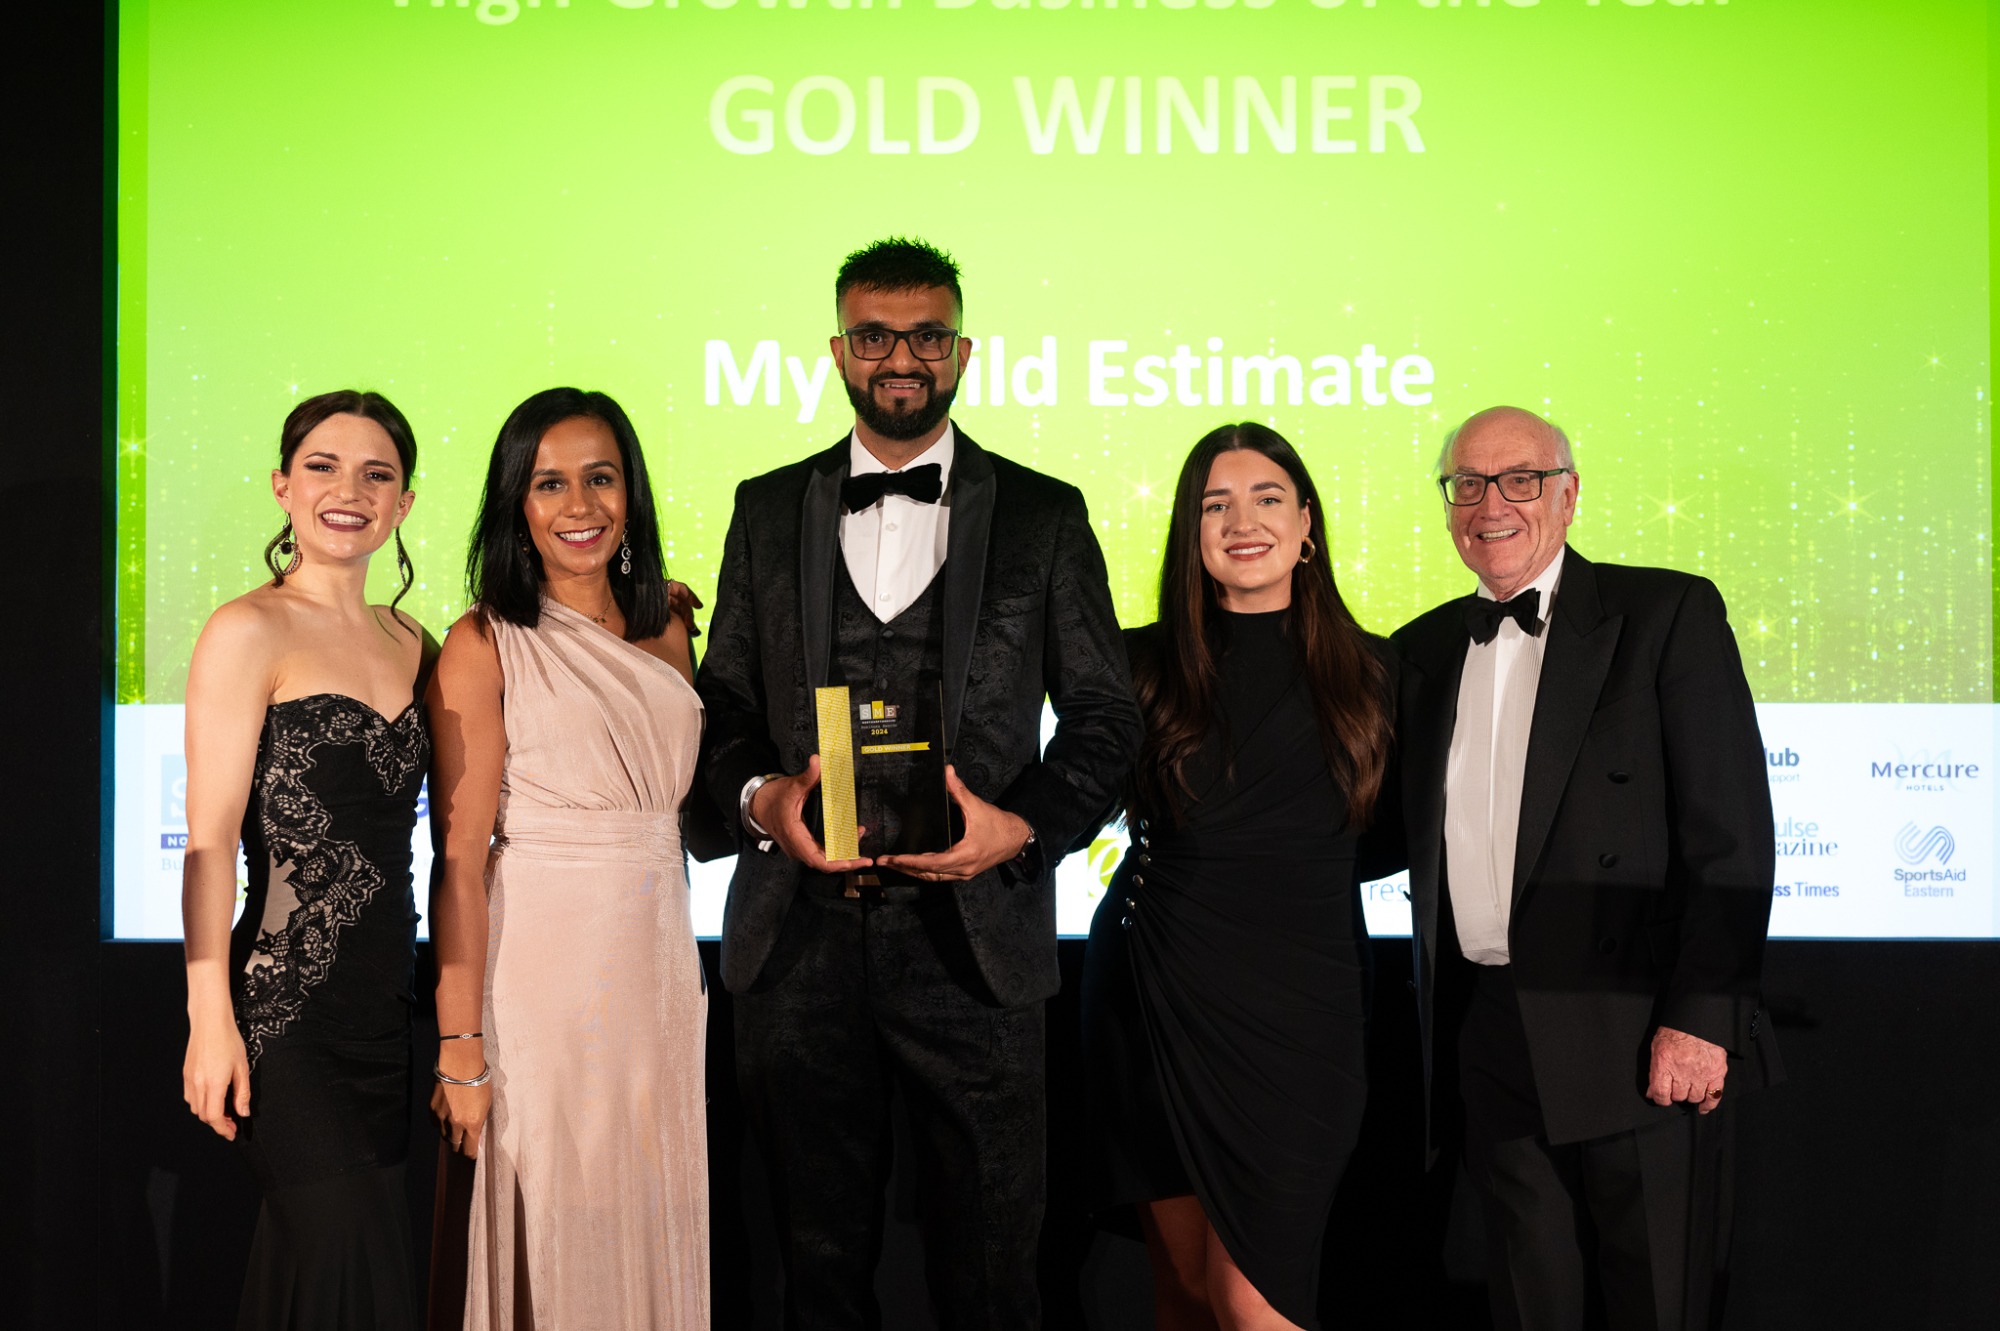 My Build Estimate wins gold for growth | Northamptonshire Chamber of Commerce